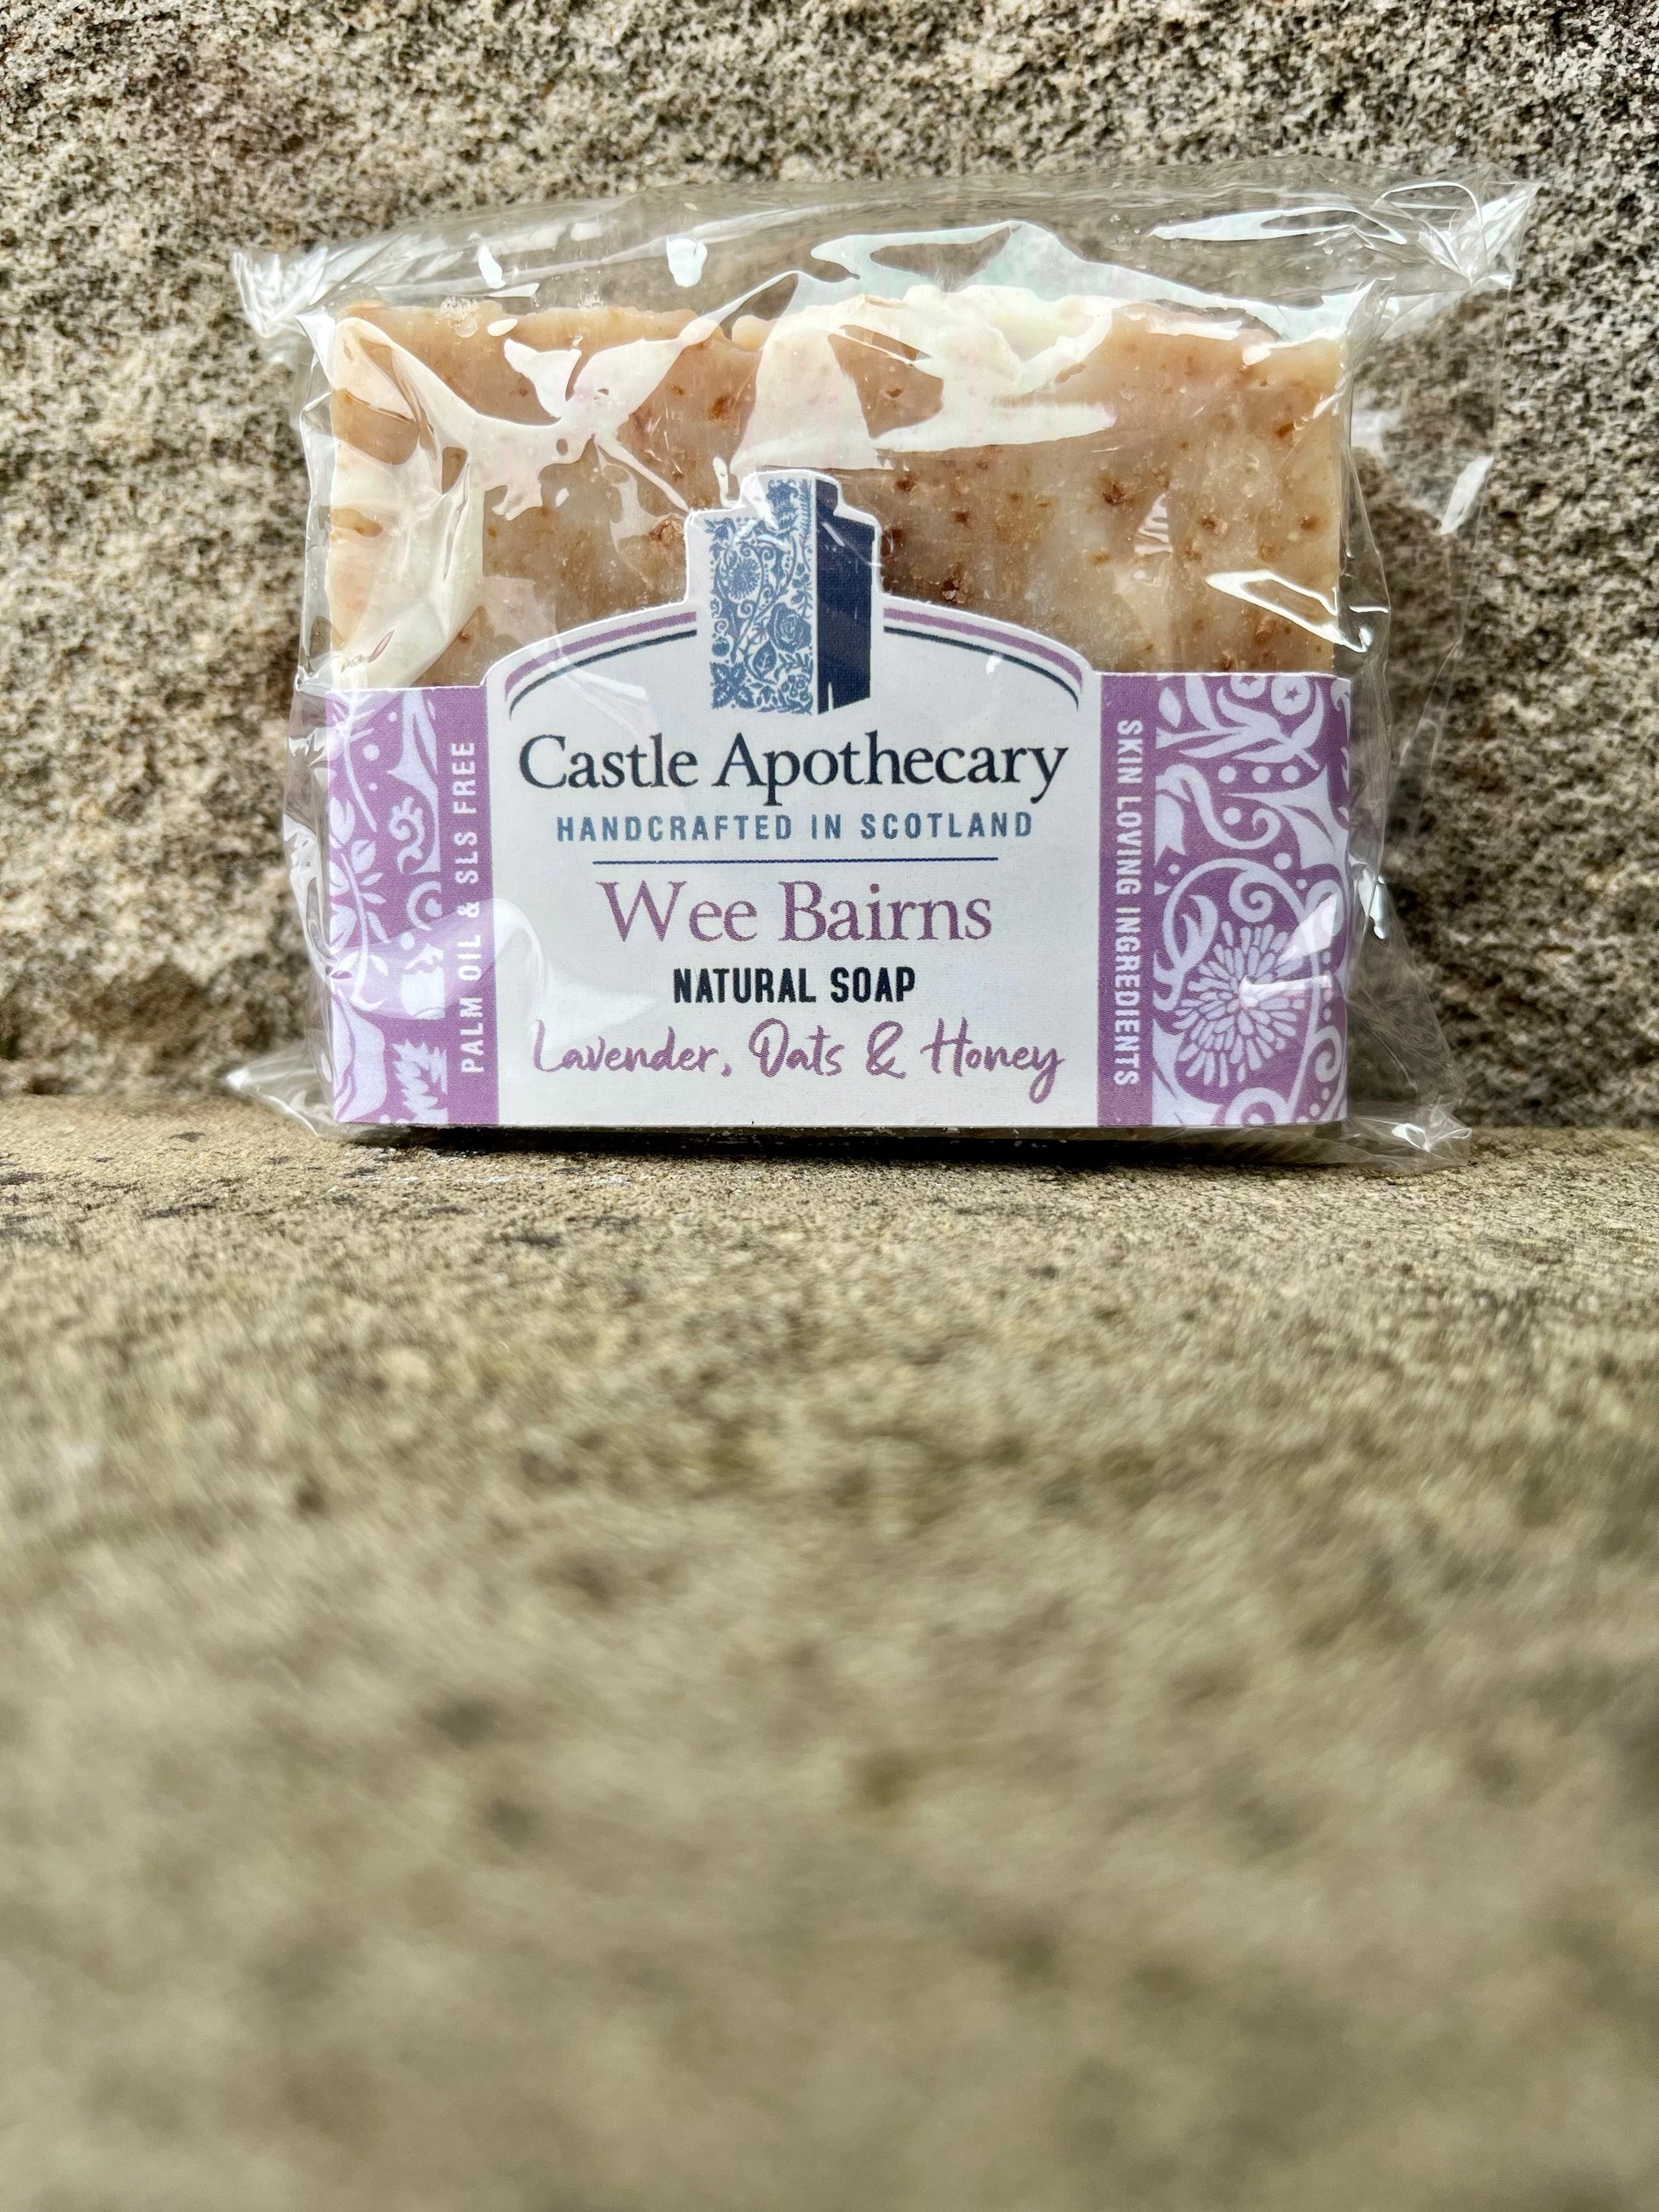 Wee Bairns Cold pressed Natural Soap Bar photographed against a castle stone background. Rectangular shaped hand crafted soap made with Scottish Oats, Honey and Gently scented with Lavender essential oil.  The rectangular bar can fit in a hand.